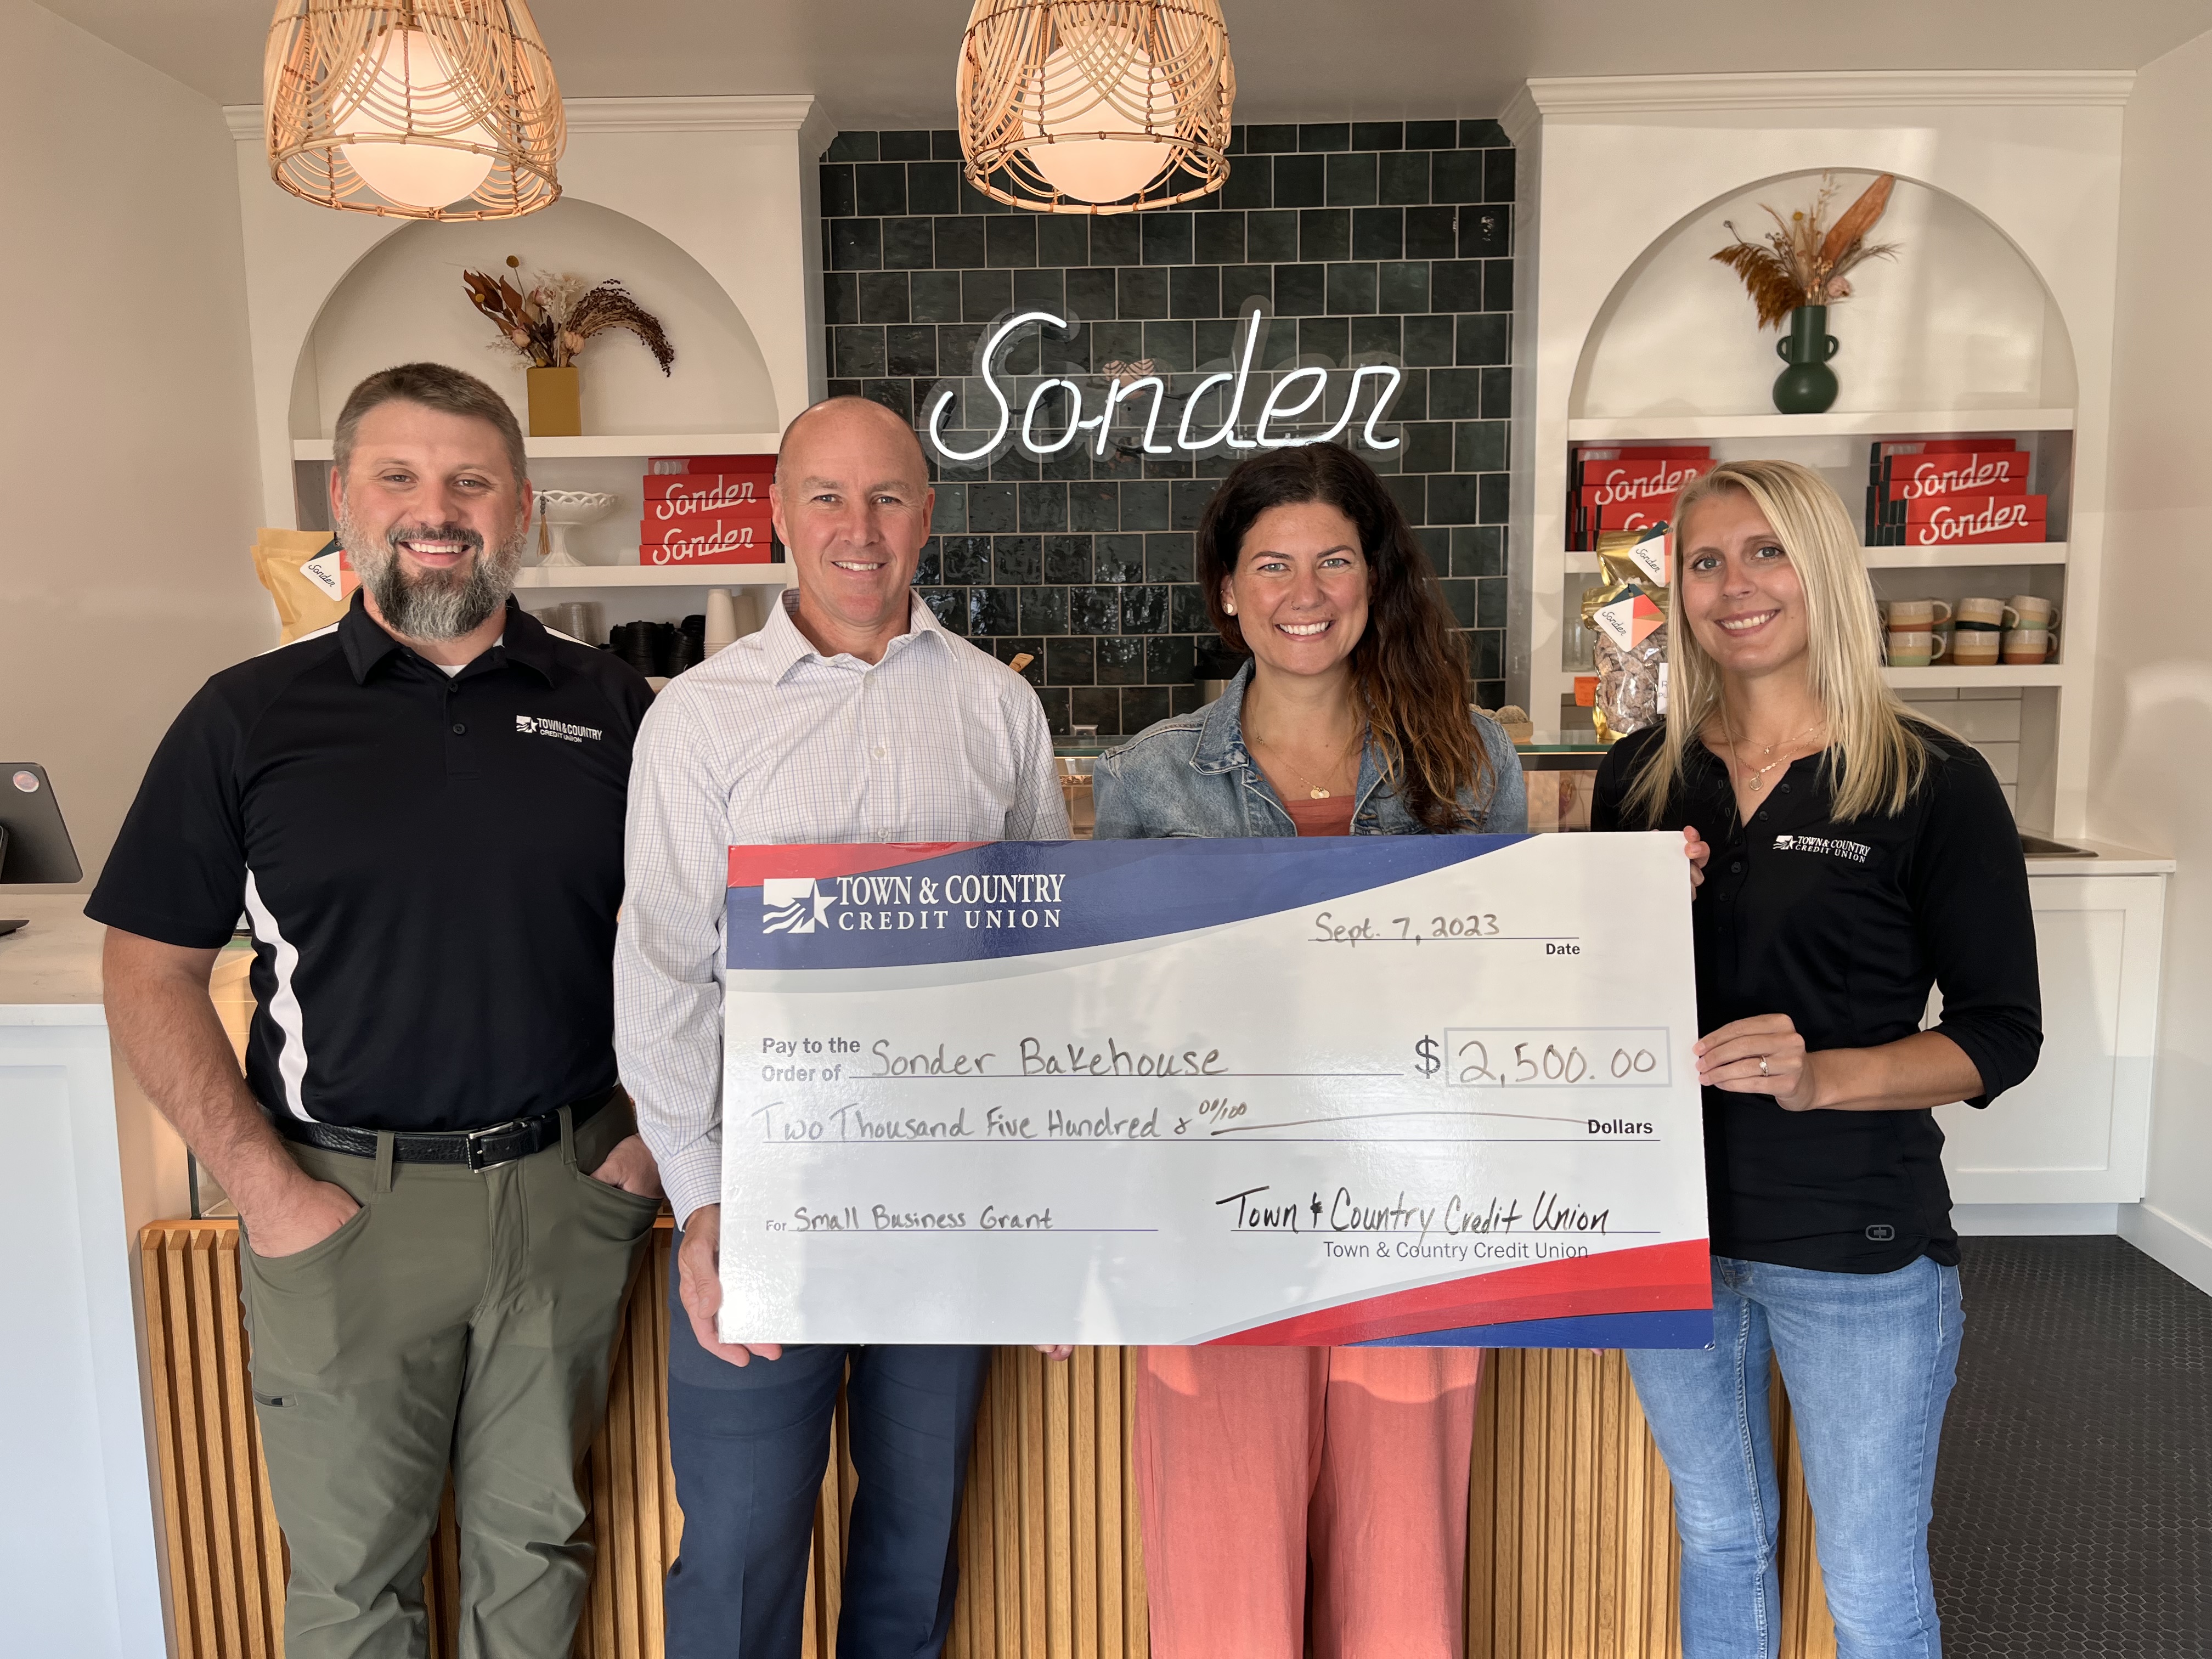 Town & Country staff presenting a large ceremonial check to Sonder Bakehouse